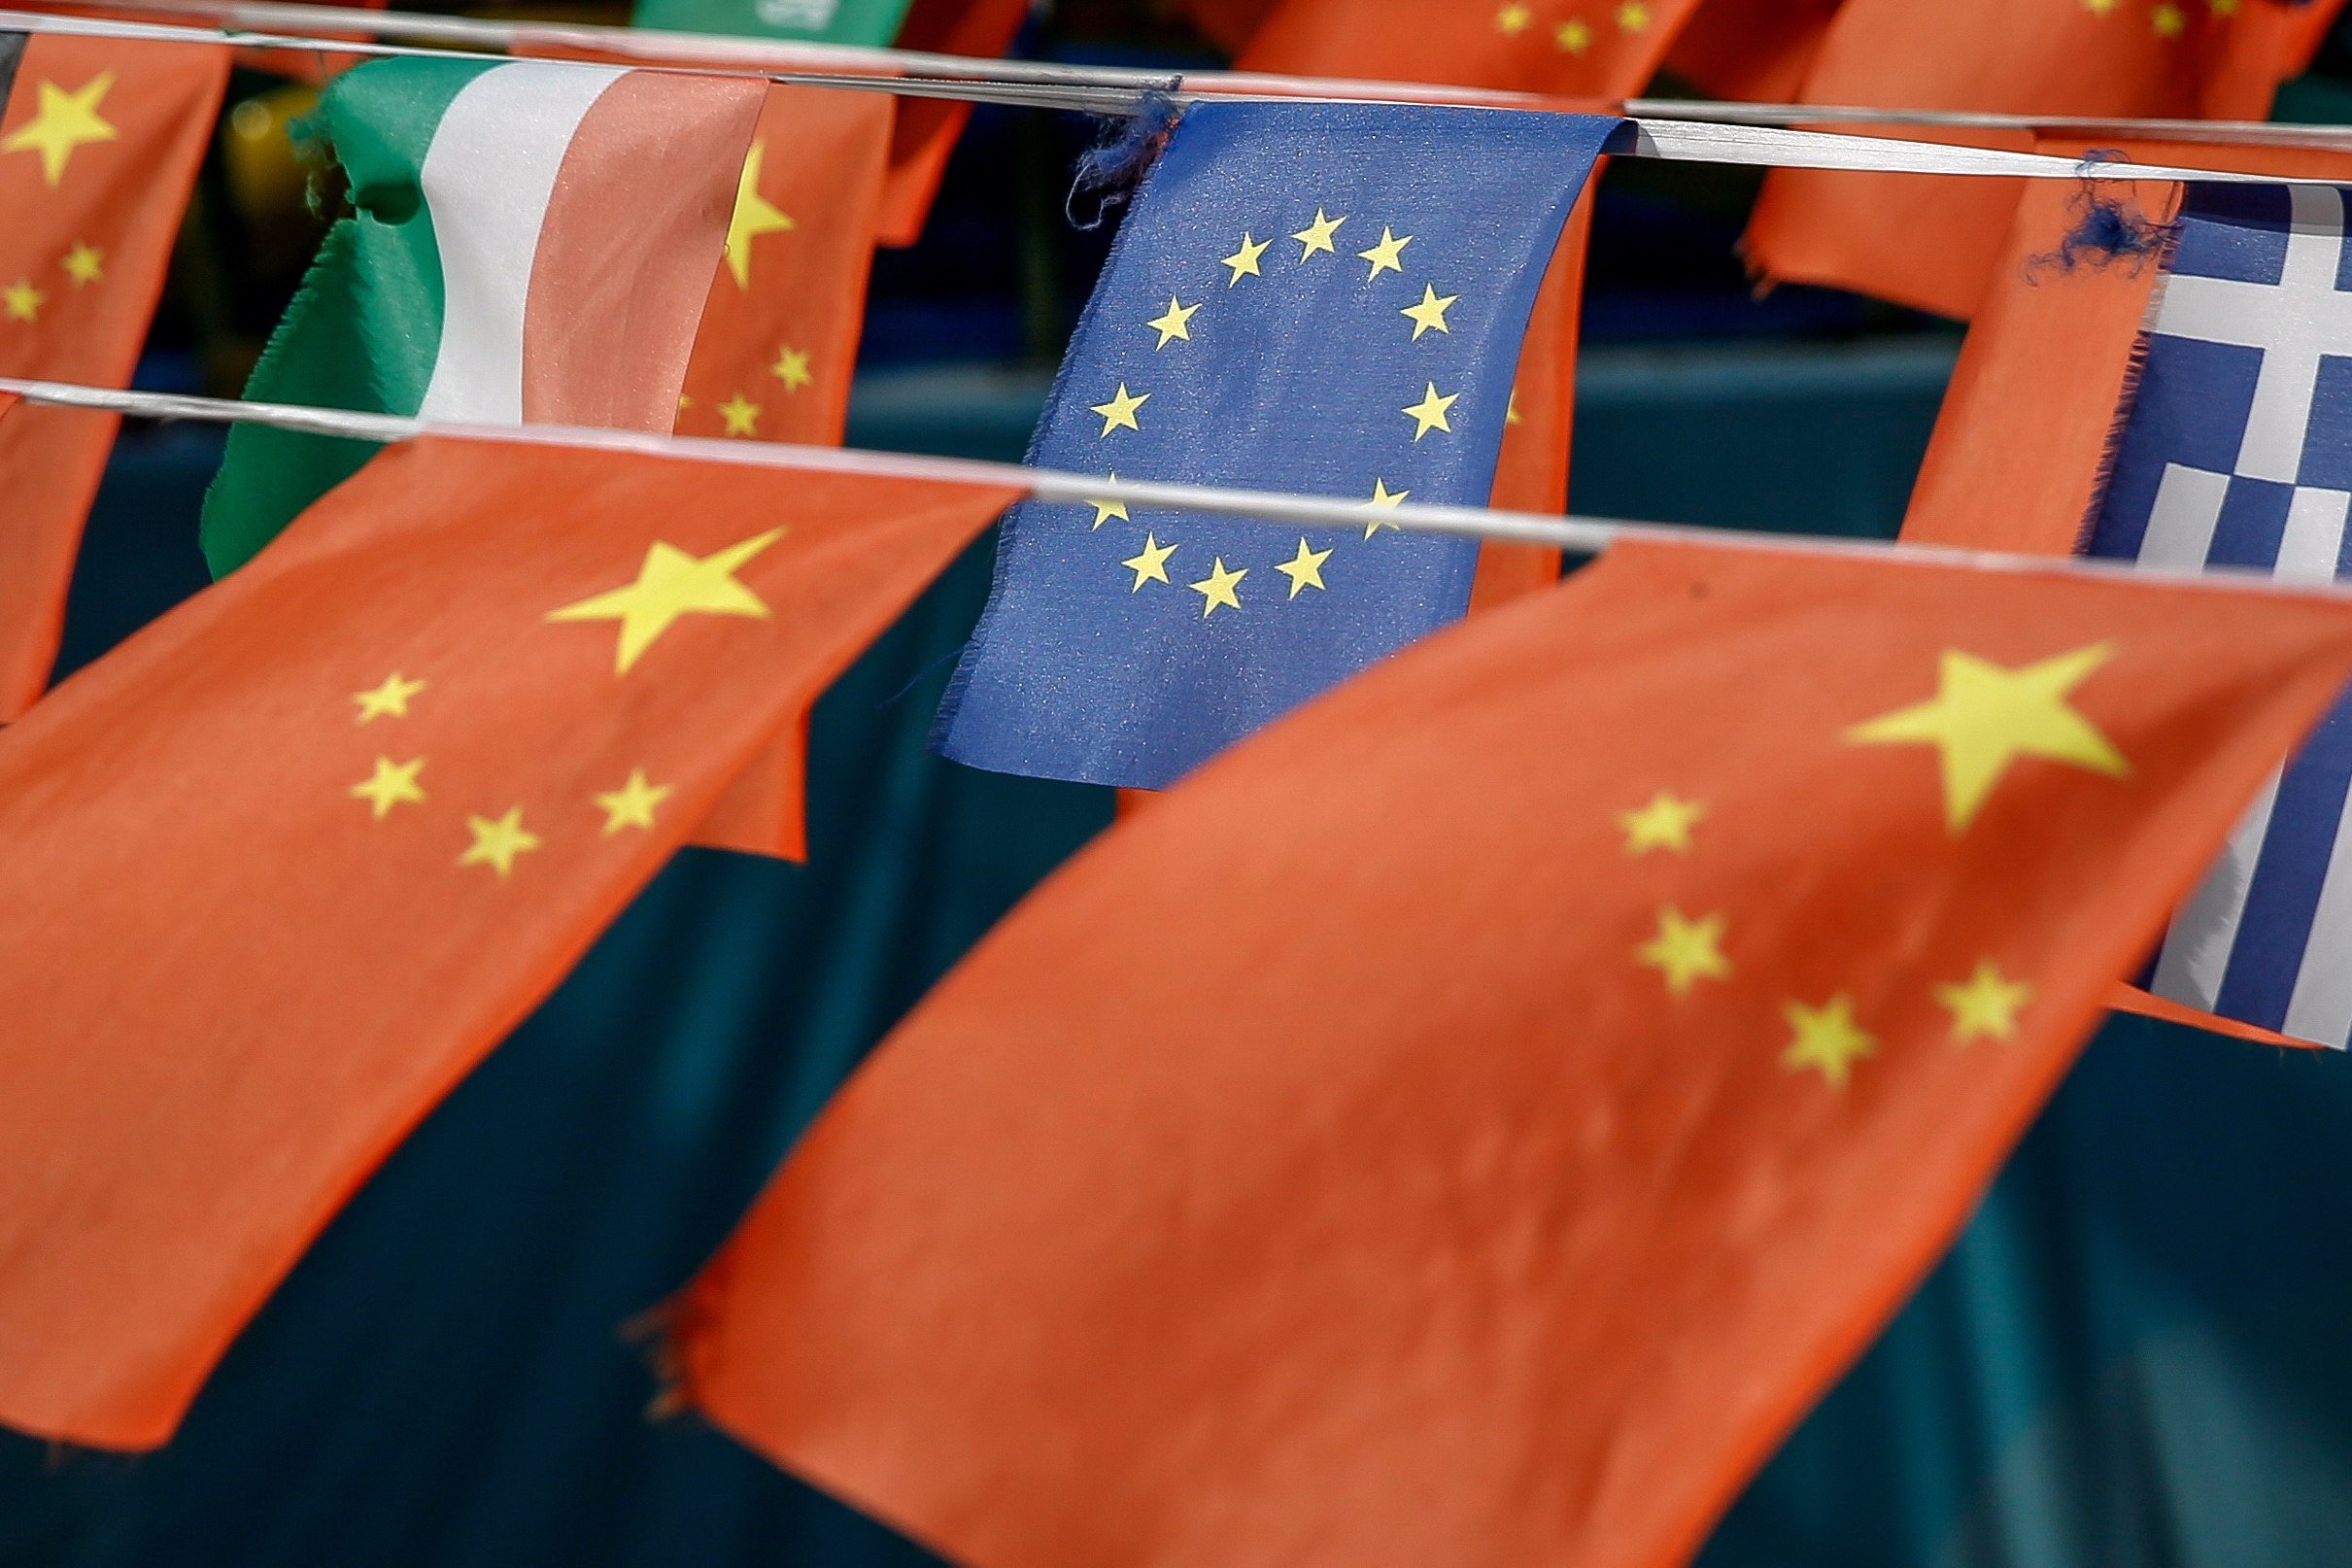 The EU consulates in Hong Kong have joined forces to ask Beijing for more information on its request for them to supply personal details of staff recruited in the city. Photo: EPA-EFE